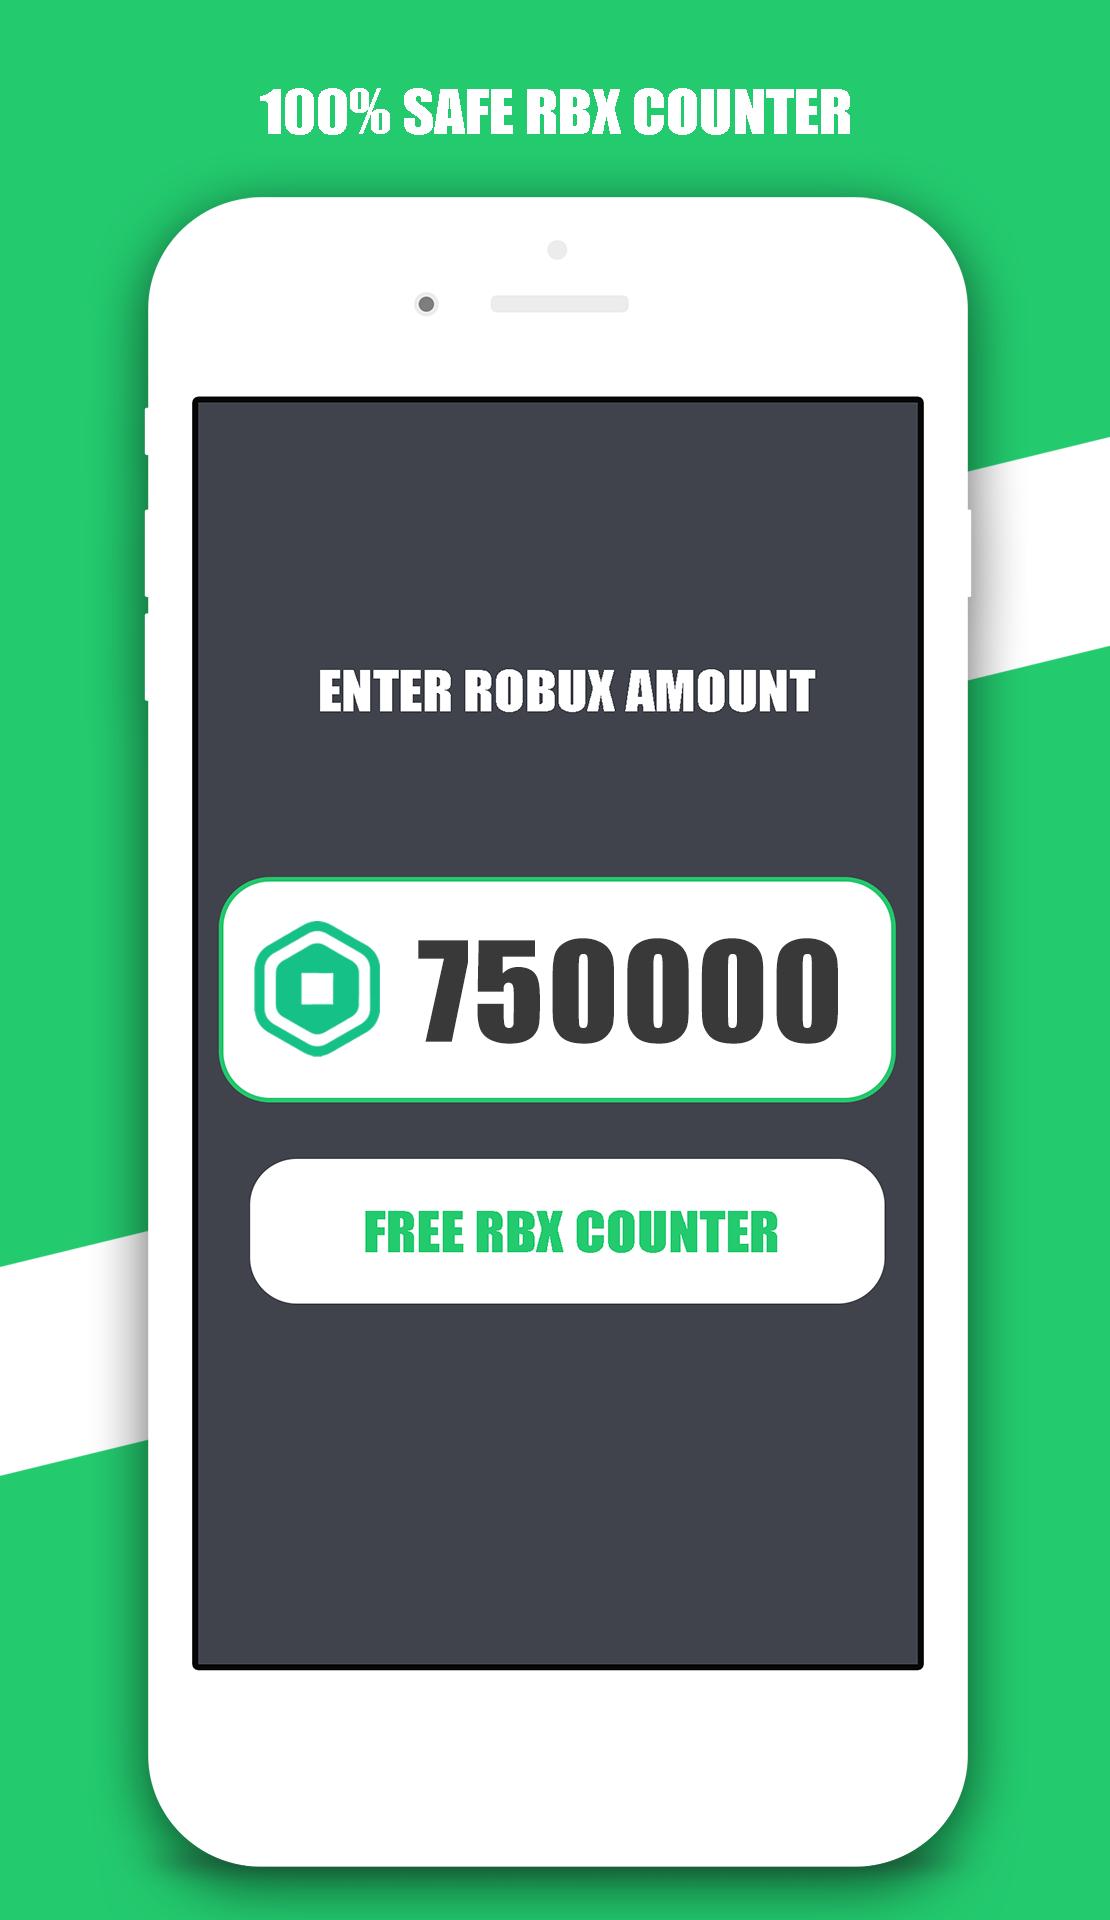 Free Robux Counter For Android Apk Download - ดาวนโหลด free robux counter for roblox apk6 รนลาสด 10